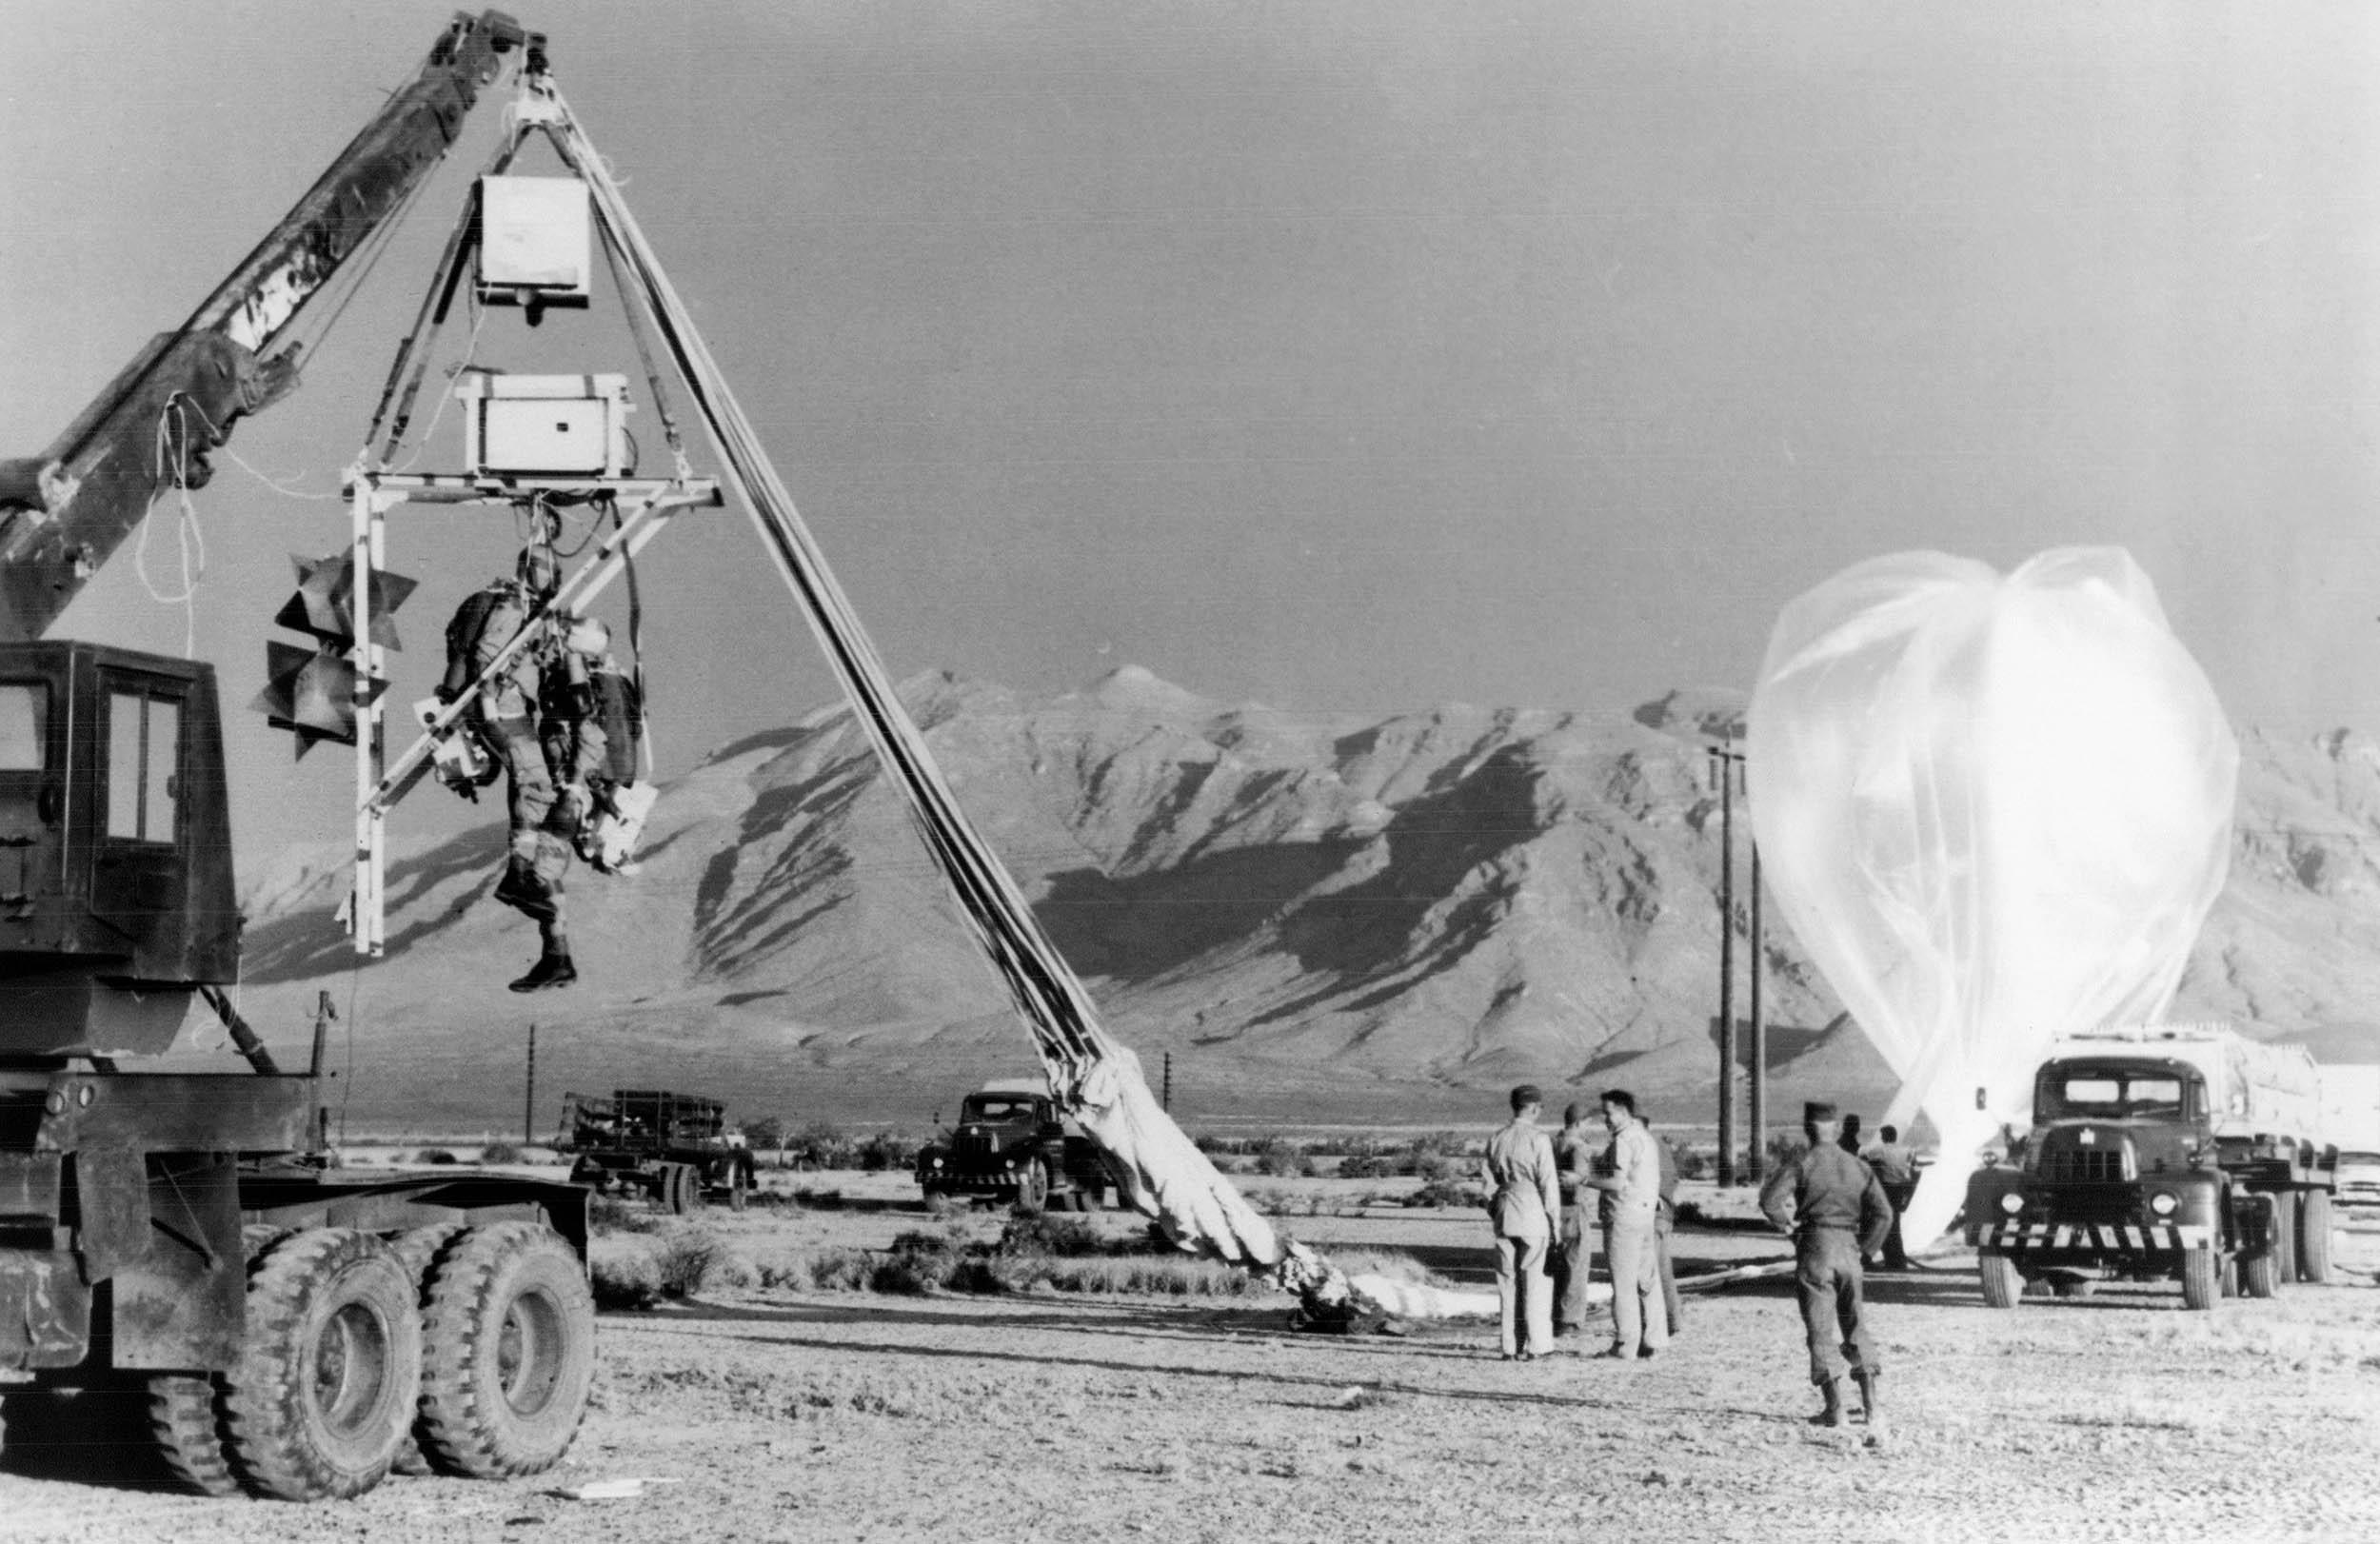 Project High Dive anthropomorphic dummy launch, White Sands Proving Ground, New Mexico, June 11, 1953 (DOD/Air Force Declassification Office)